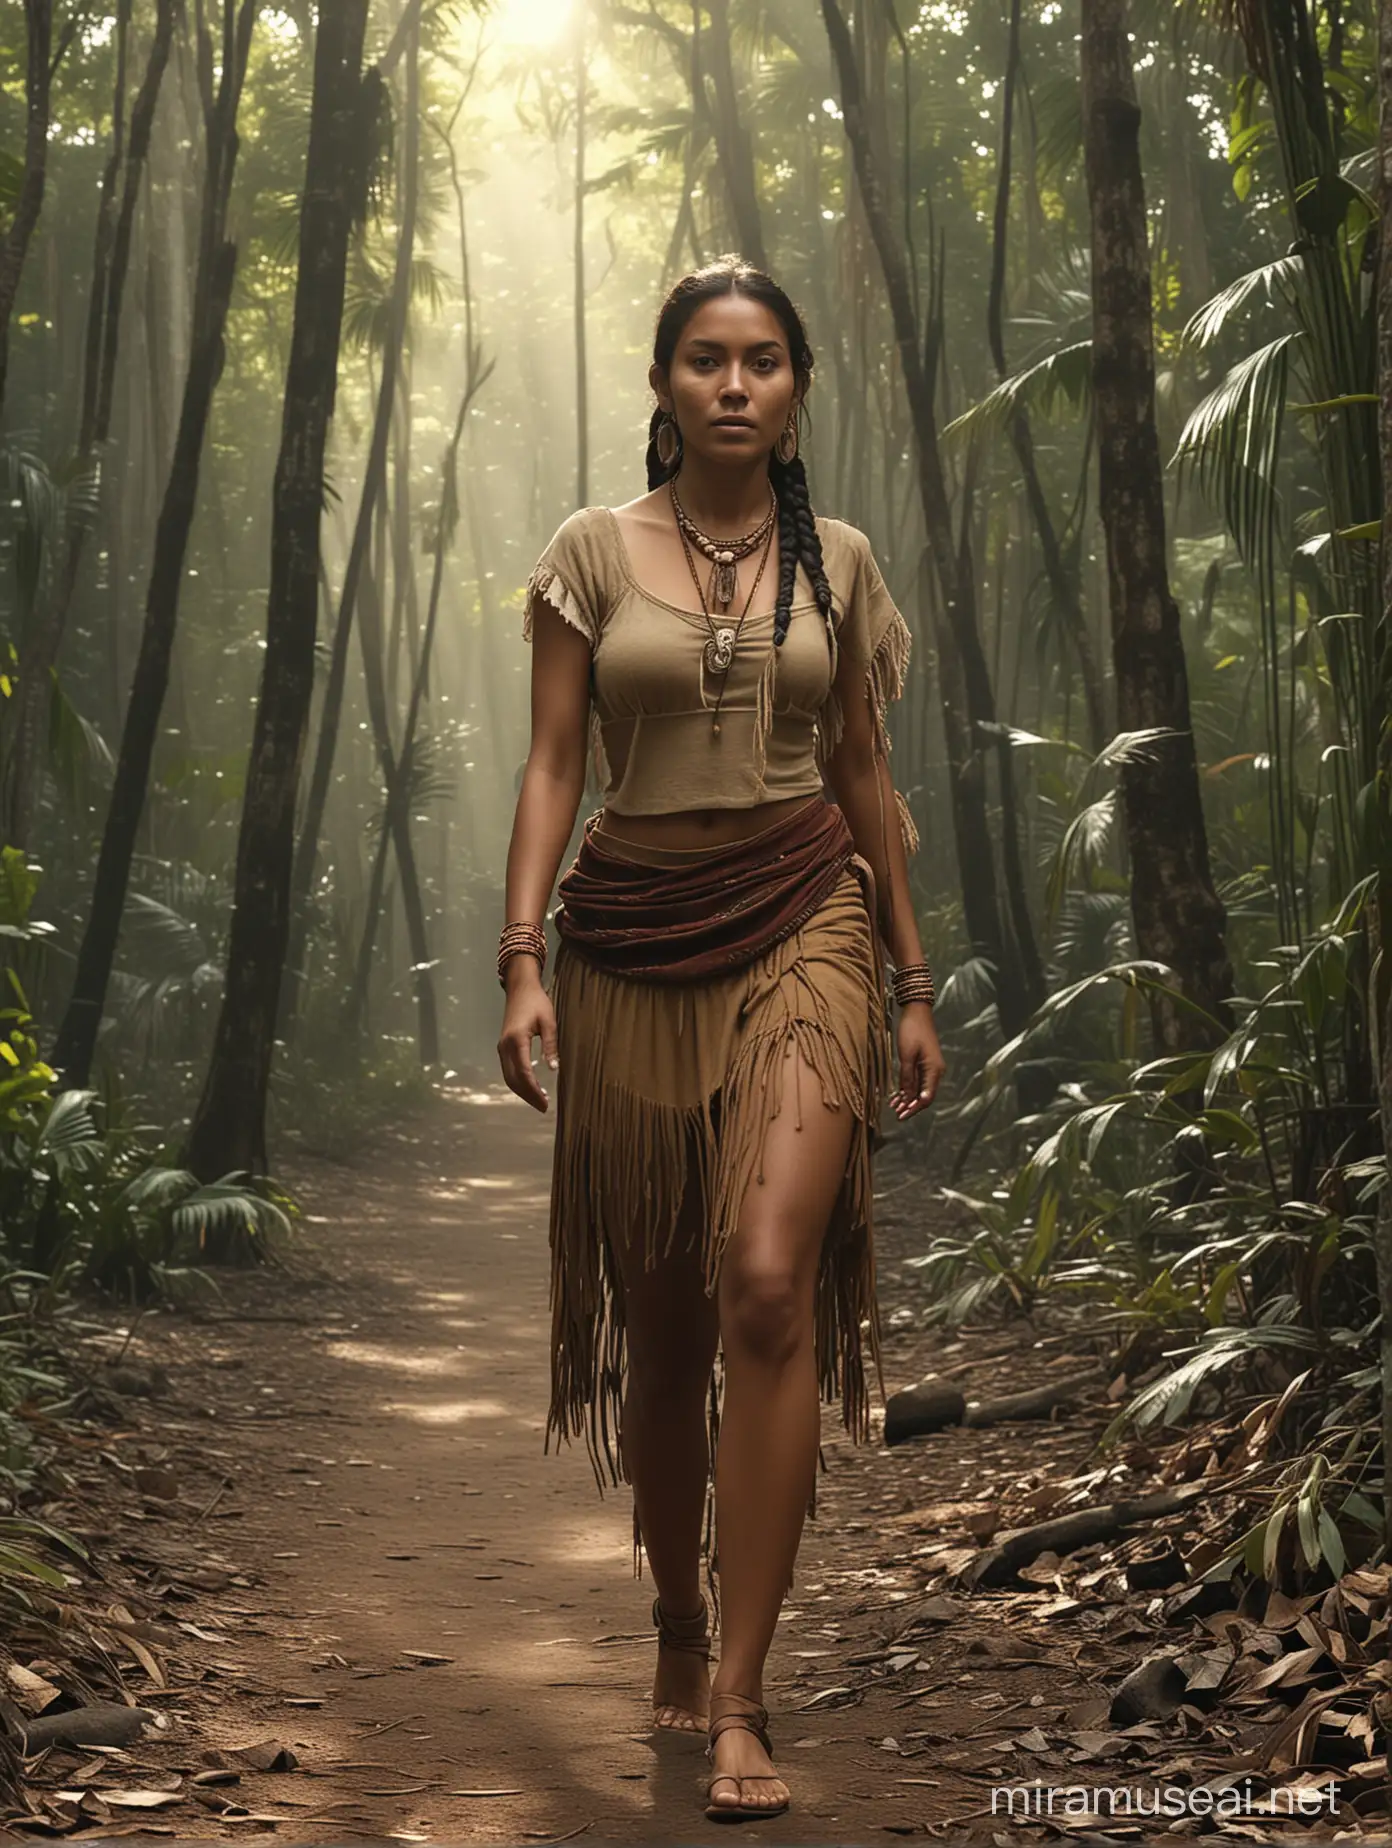 1800s Native Indian Woman Walking in Caribbean Forest with Mesoamerican Influences